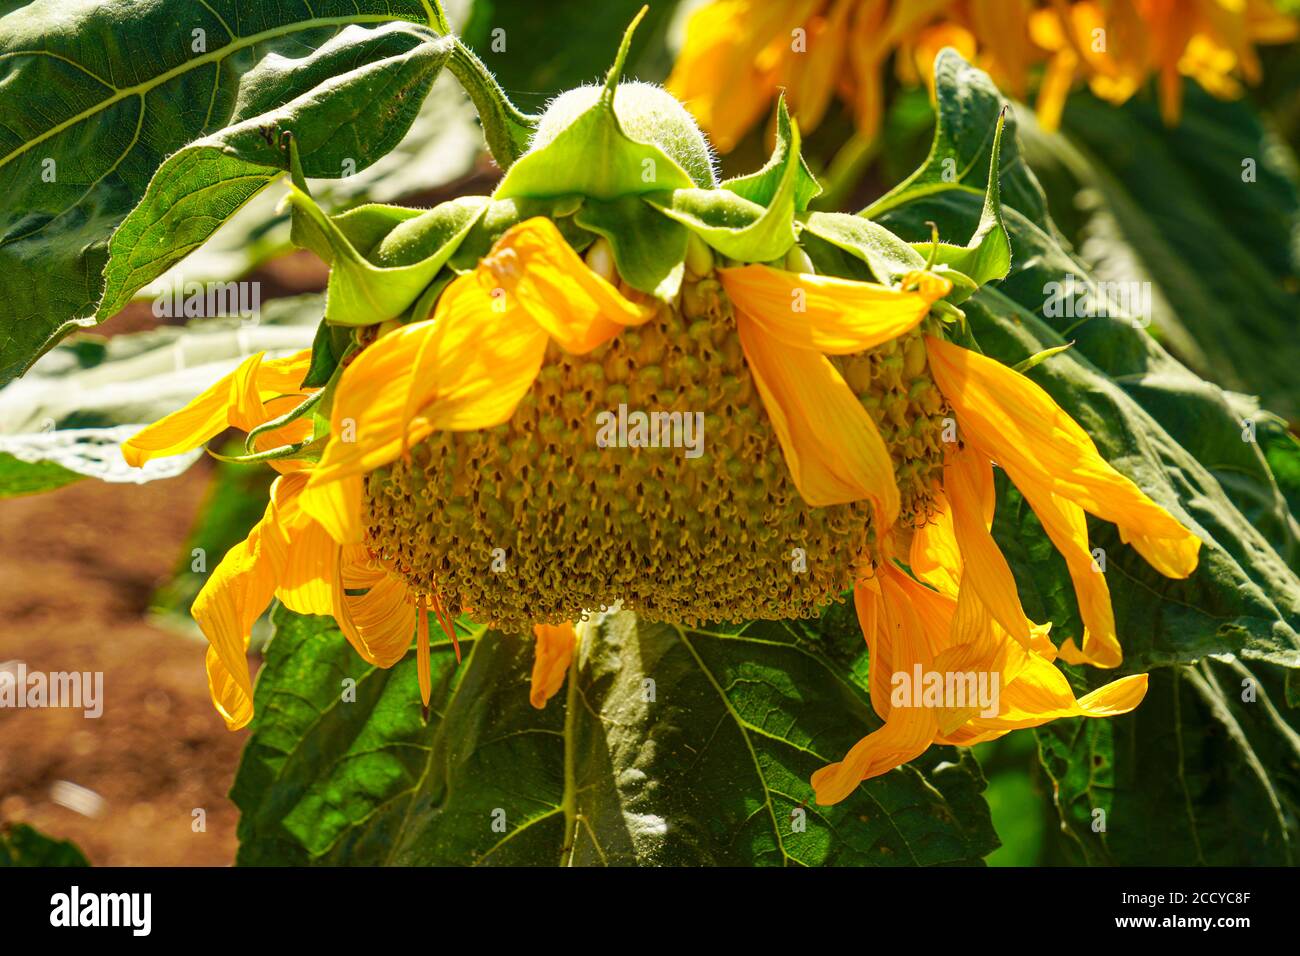 Close up of a flowering yellow sunflower in an agricultural field. Photographed in Israel in June Stock Photo